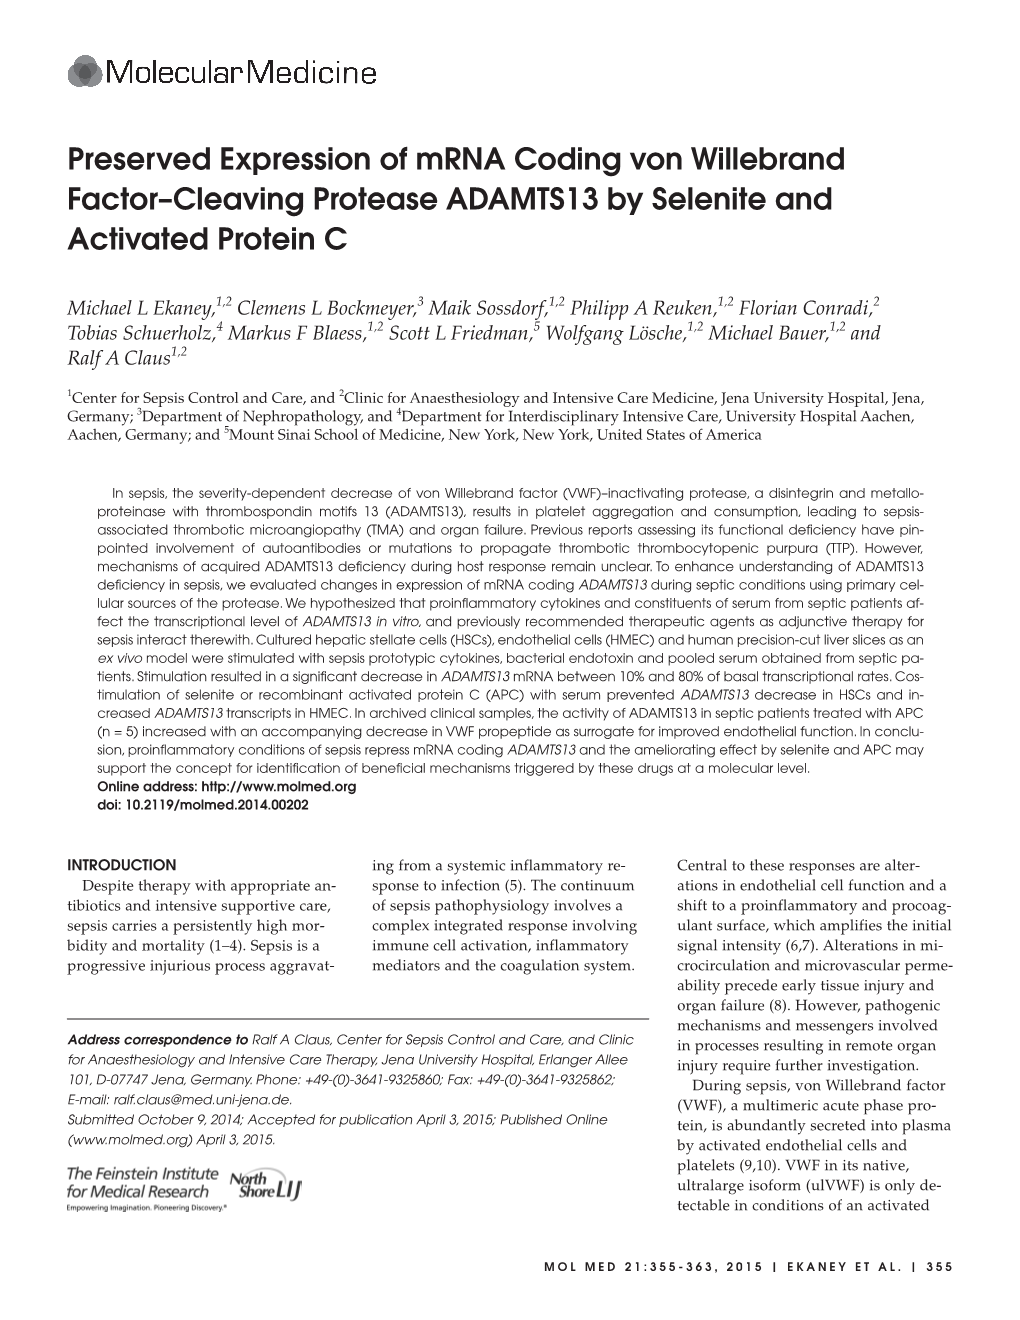 Preserved Expression of Mrna Coding Von Willebrand Factor–Cleaving Protease ADAMTS13 by Selenite and Activated Protein C